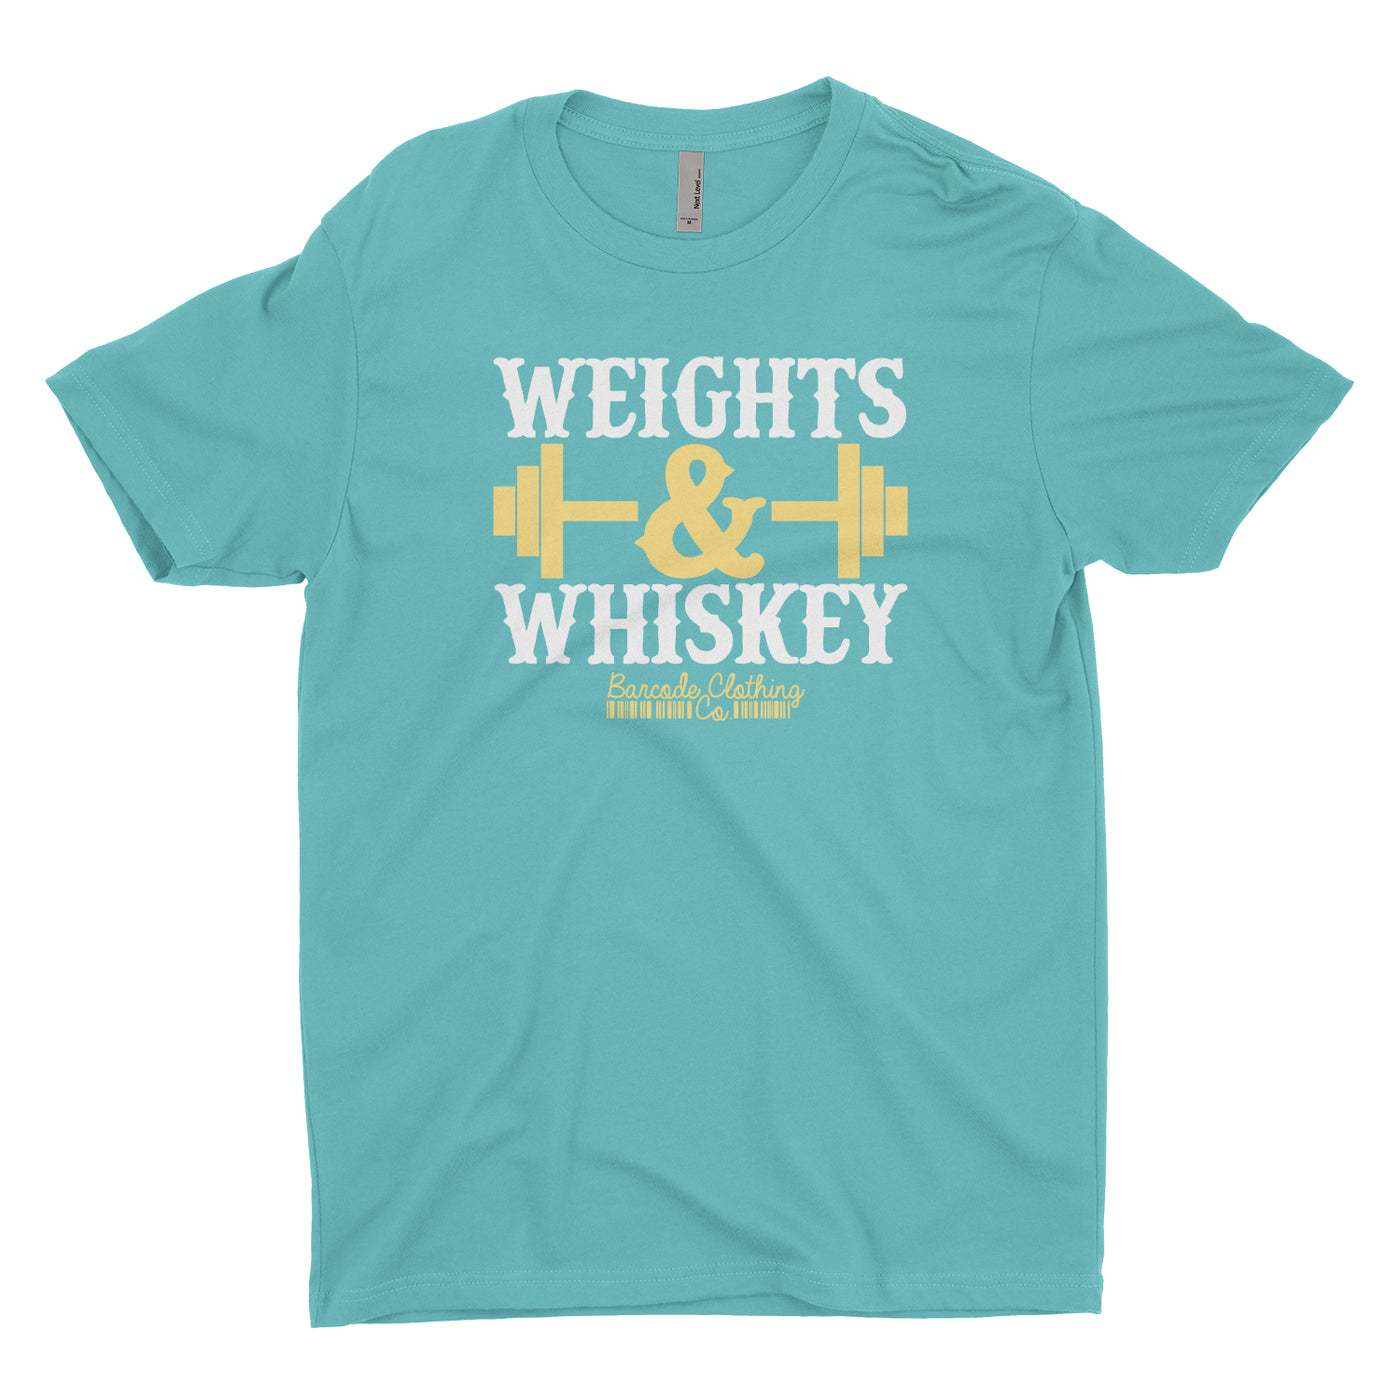 Weights & Whiskey